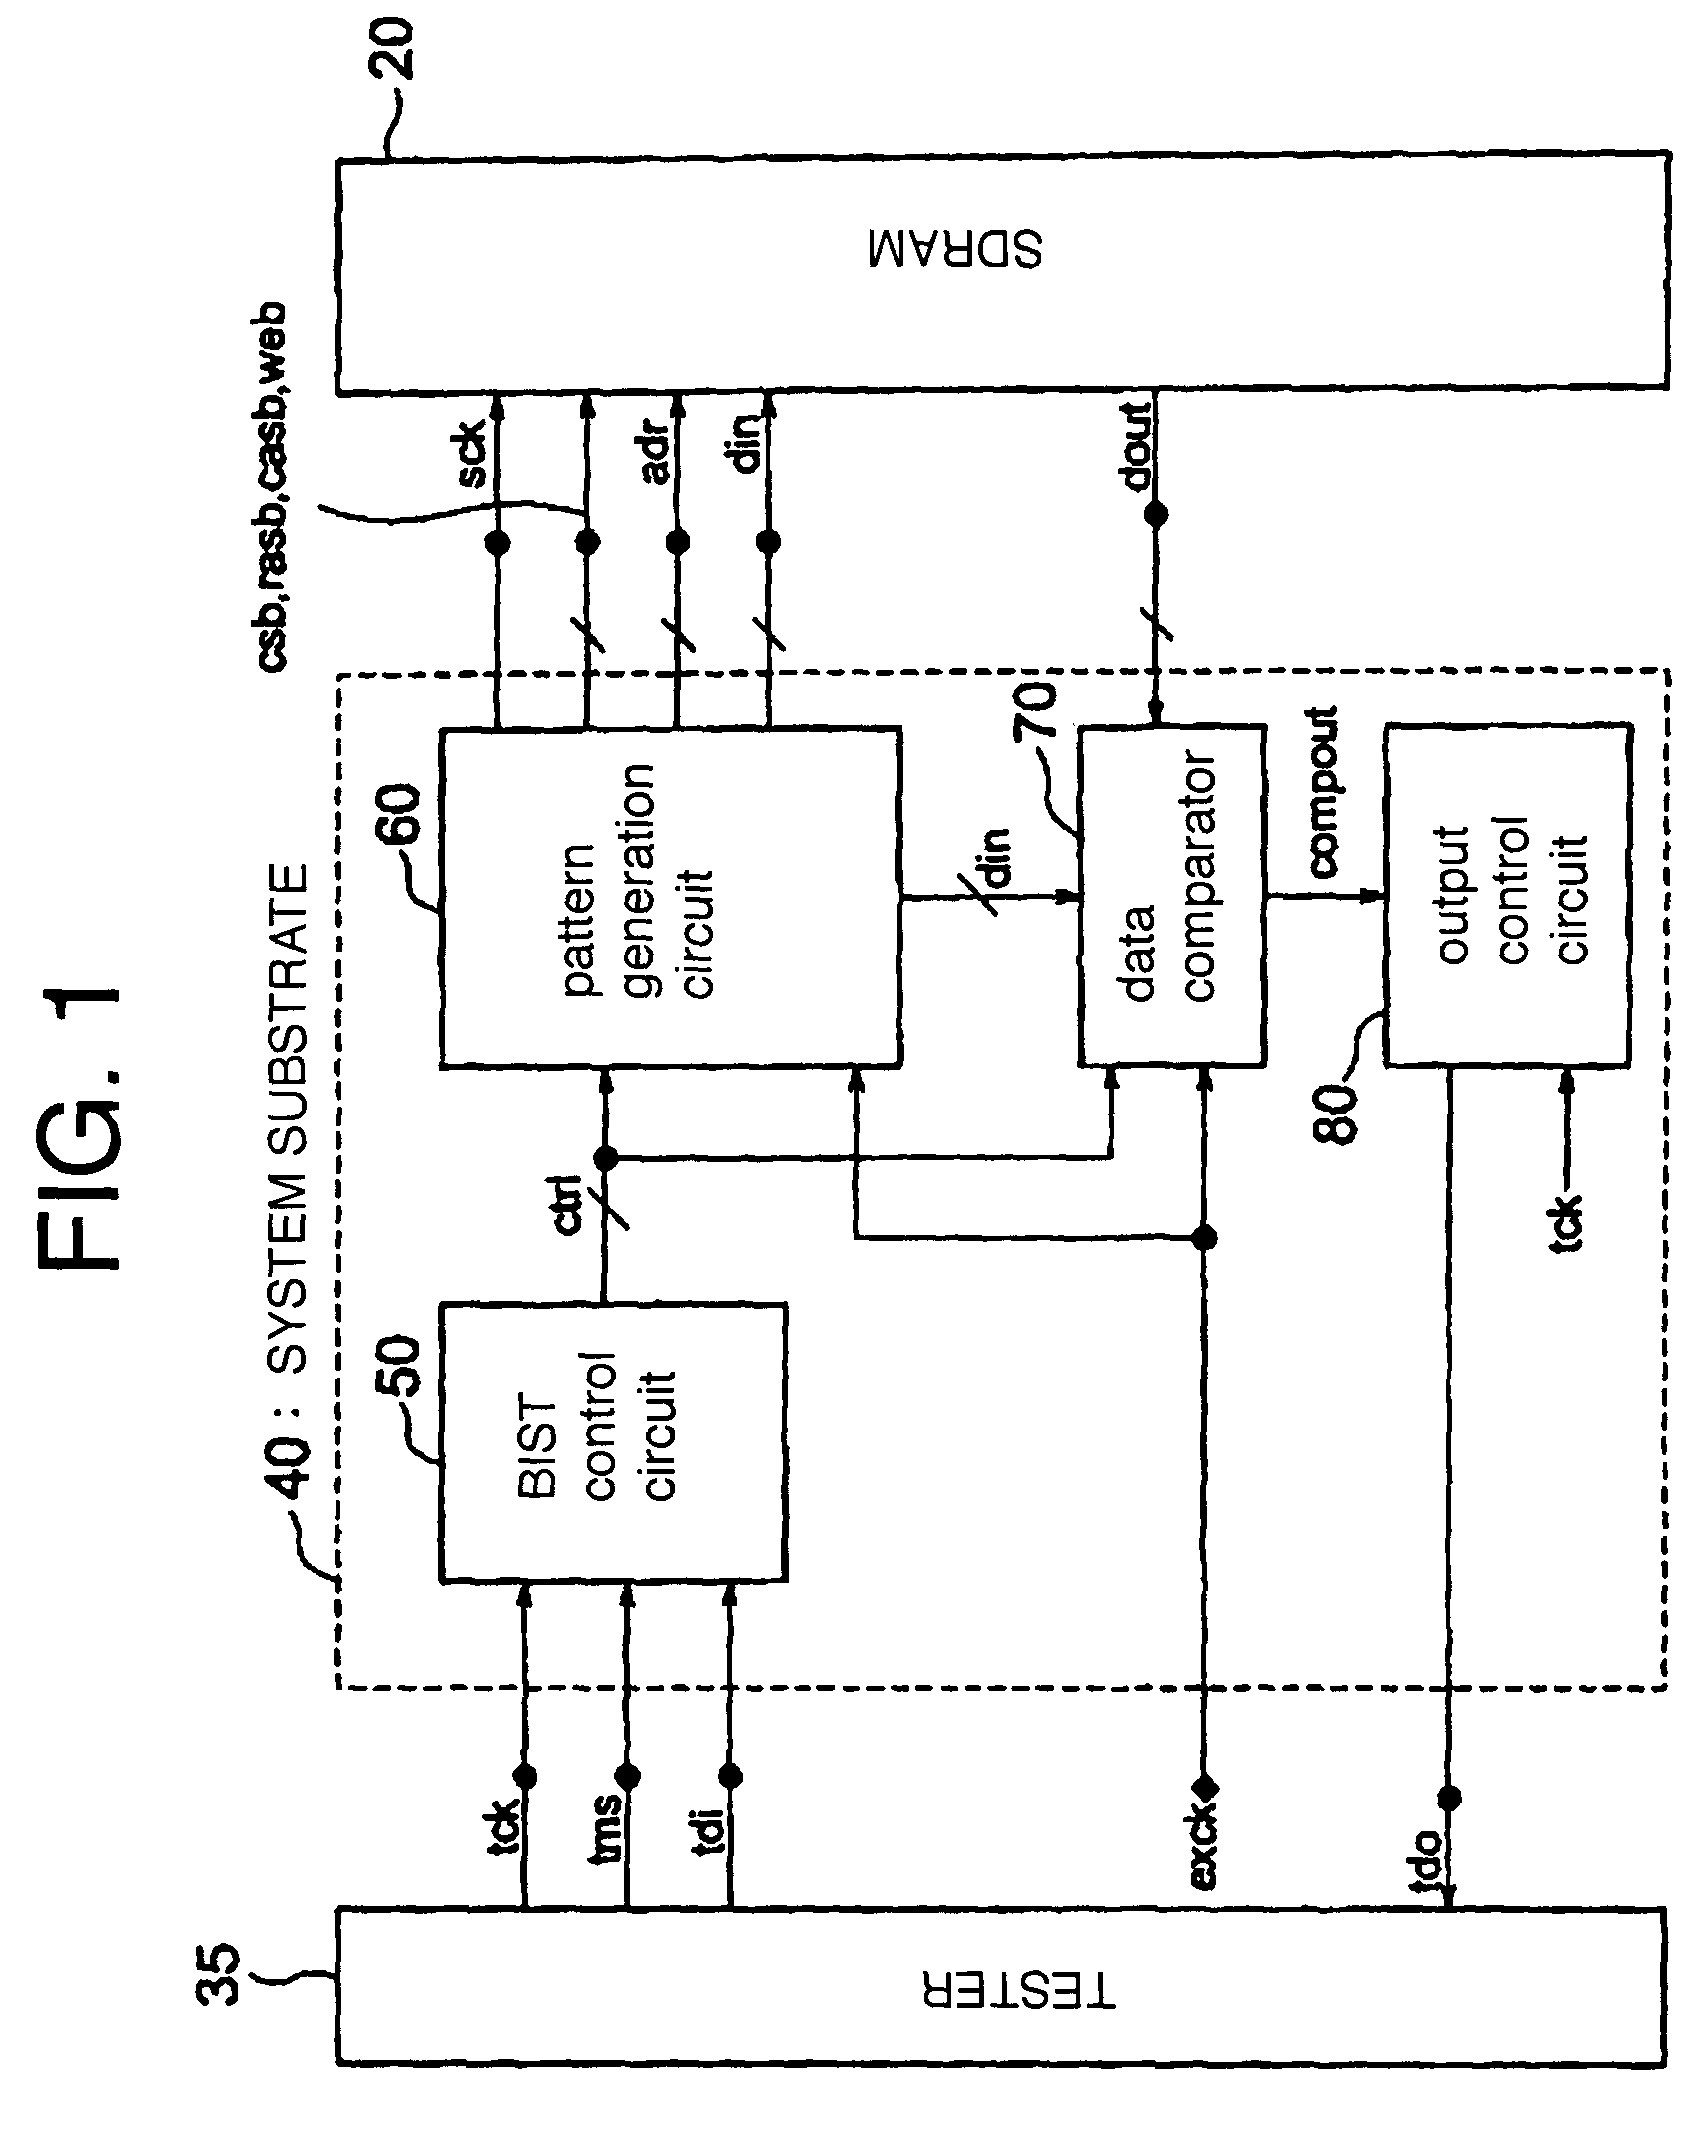 Test circuit provided with built-in self test function